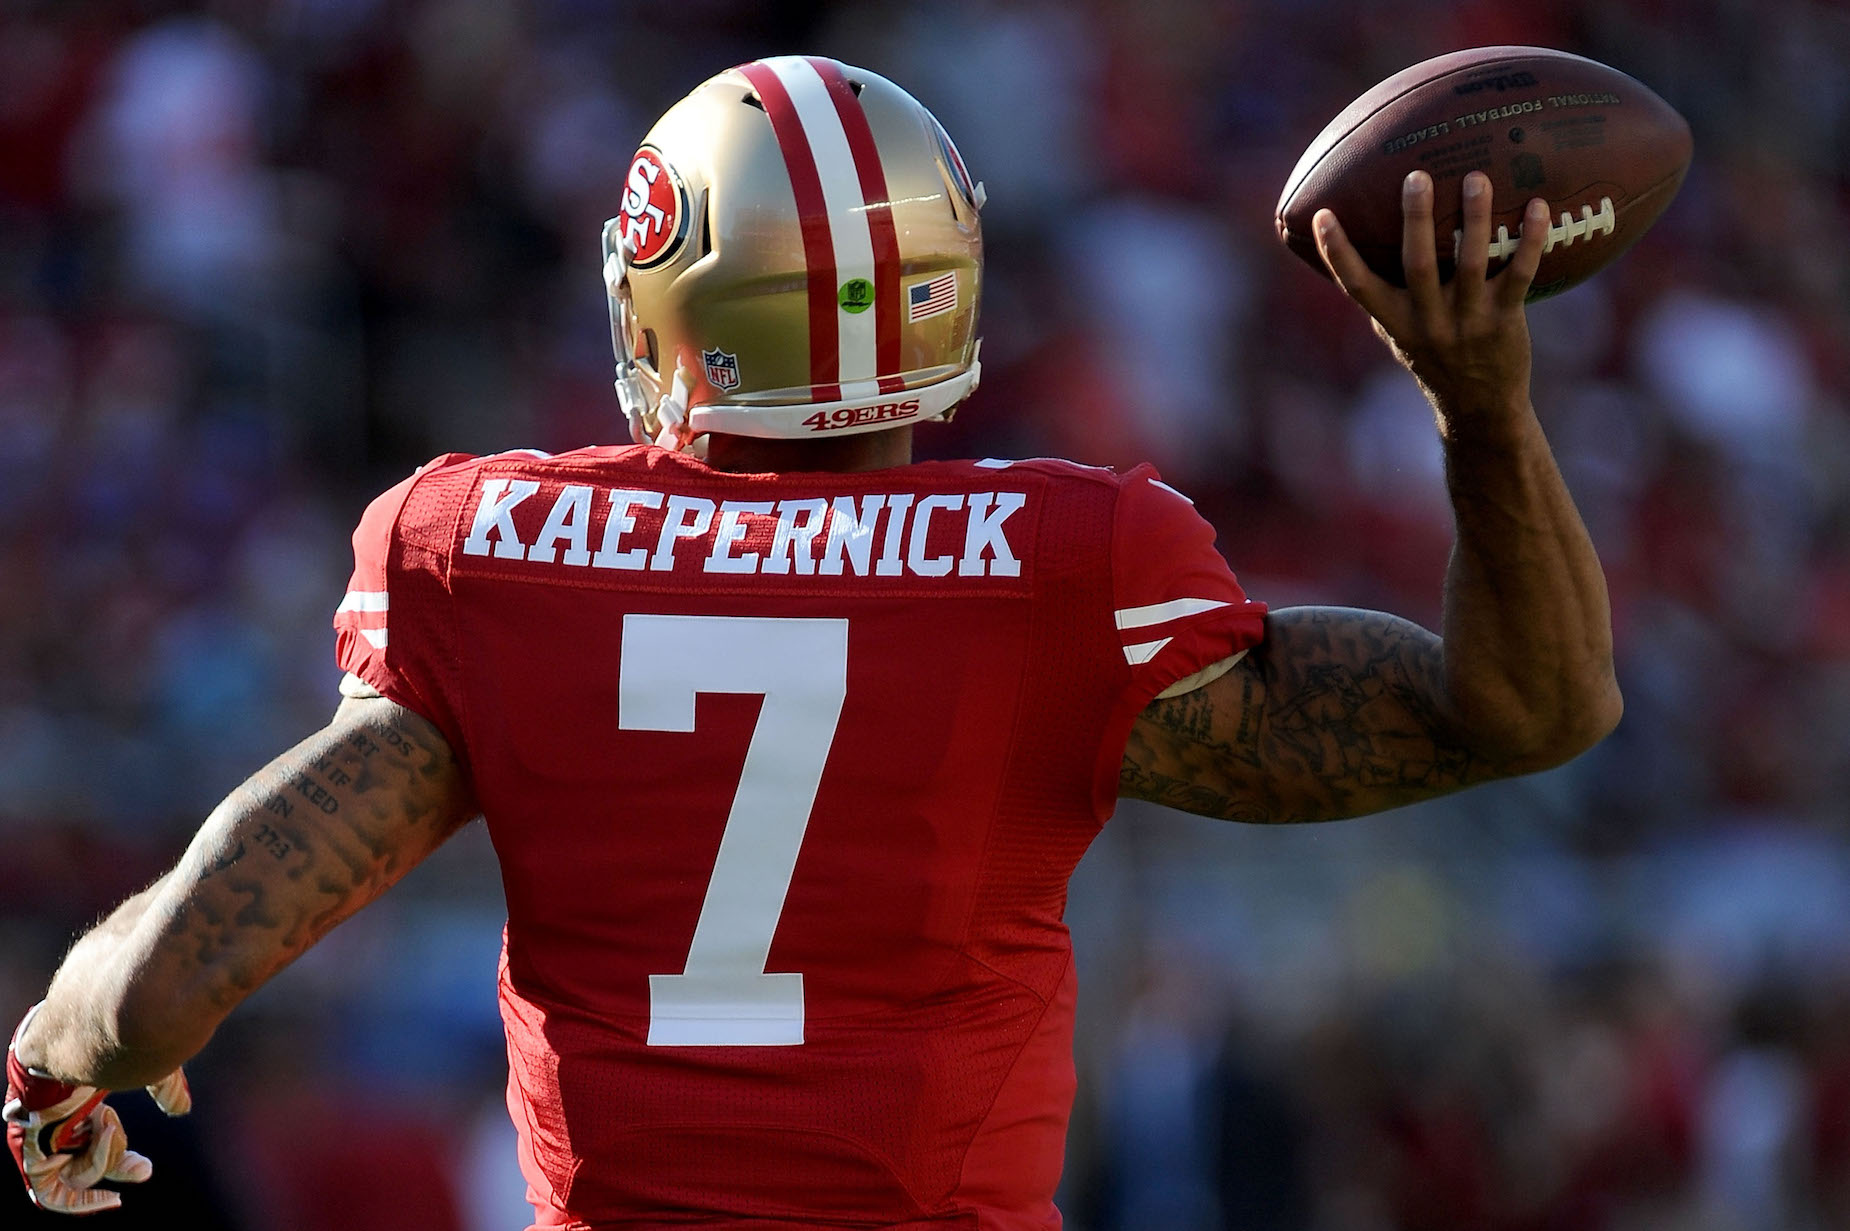 Colin Kaepernick Just Made NFL History, Even Without Taking the Field